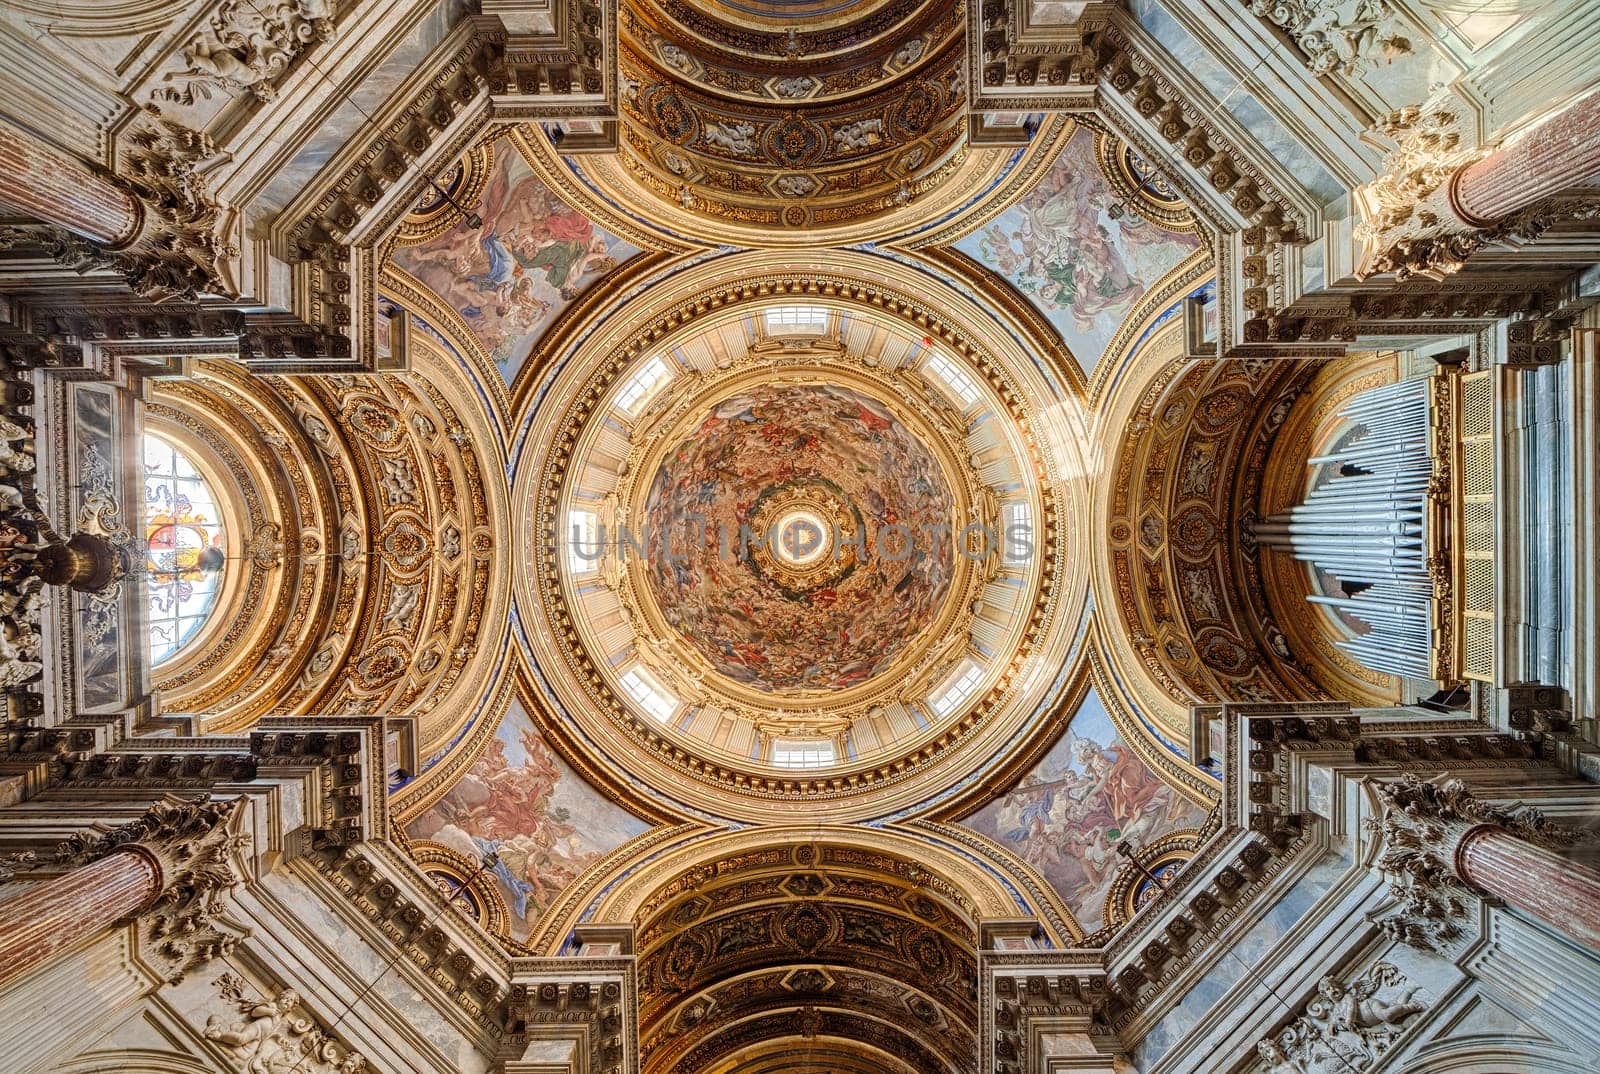 Sant Agnese in Agone in Piazza Navona is a Baroque church in Rome, Italy